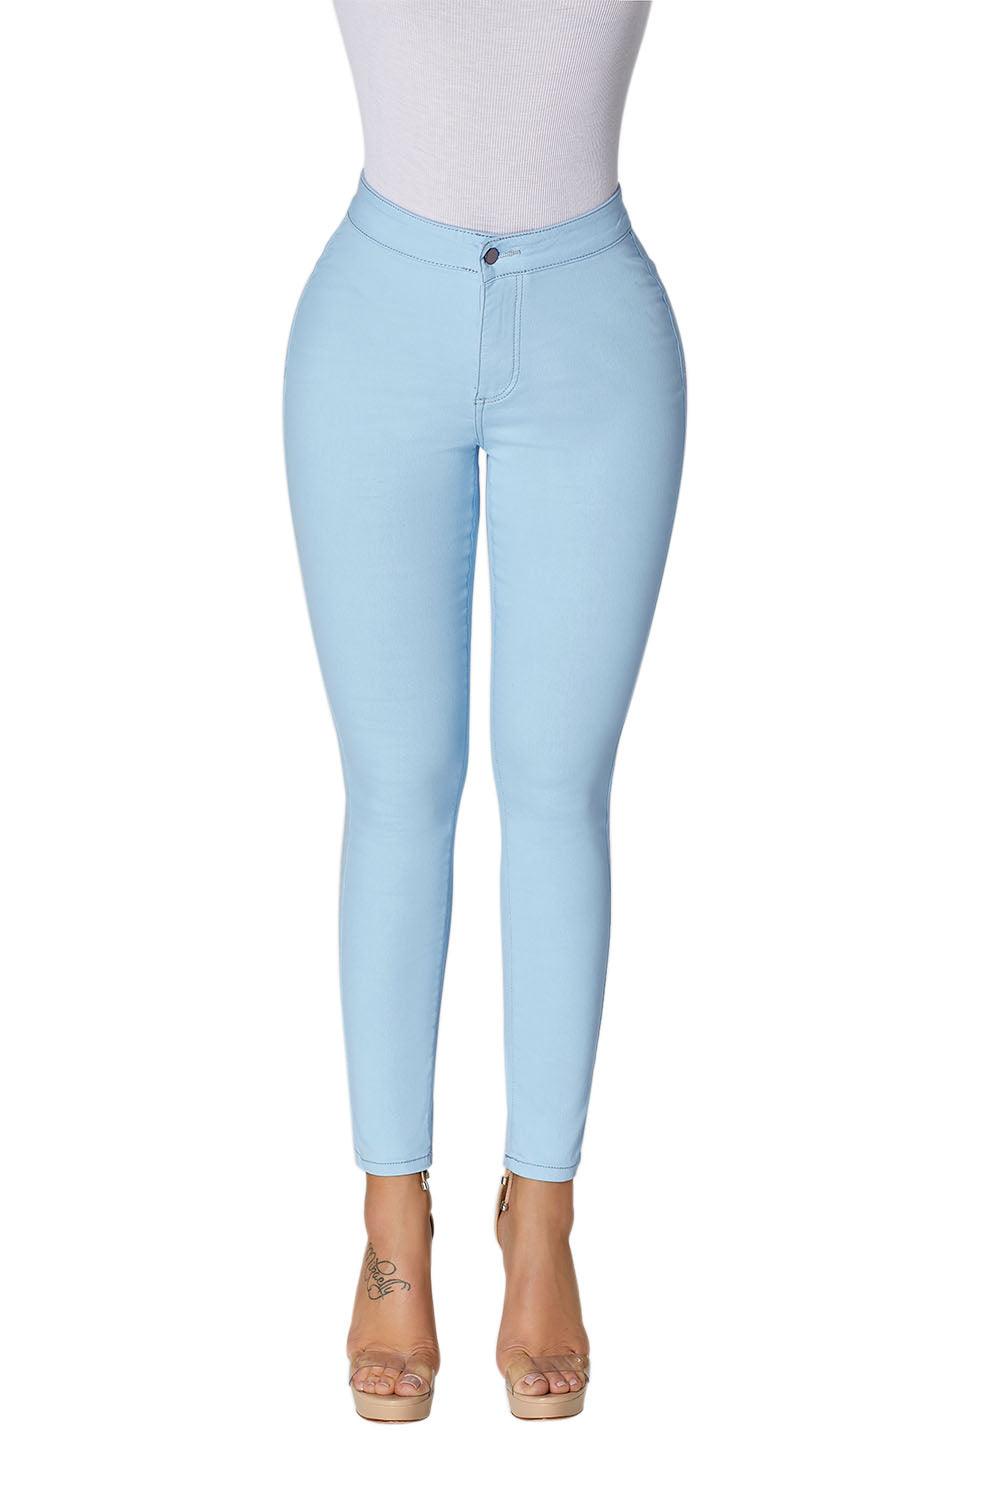 High Waist Skinny Jeans with Round Pockets - L & M Kee, LLC